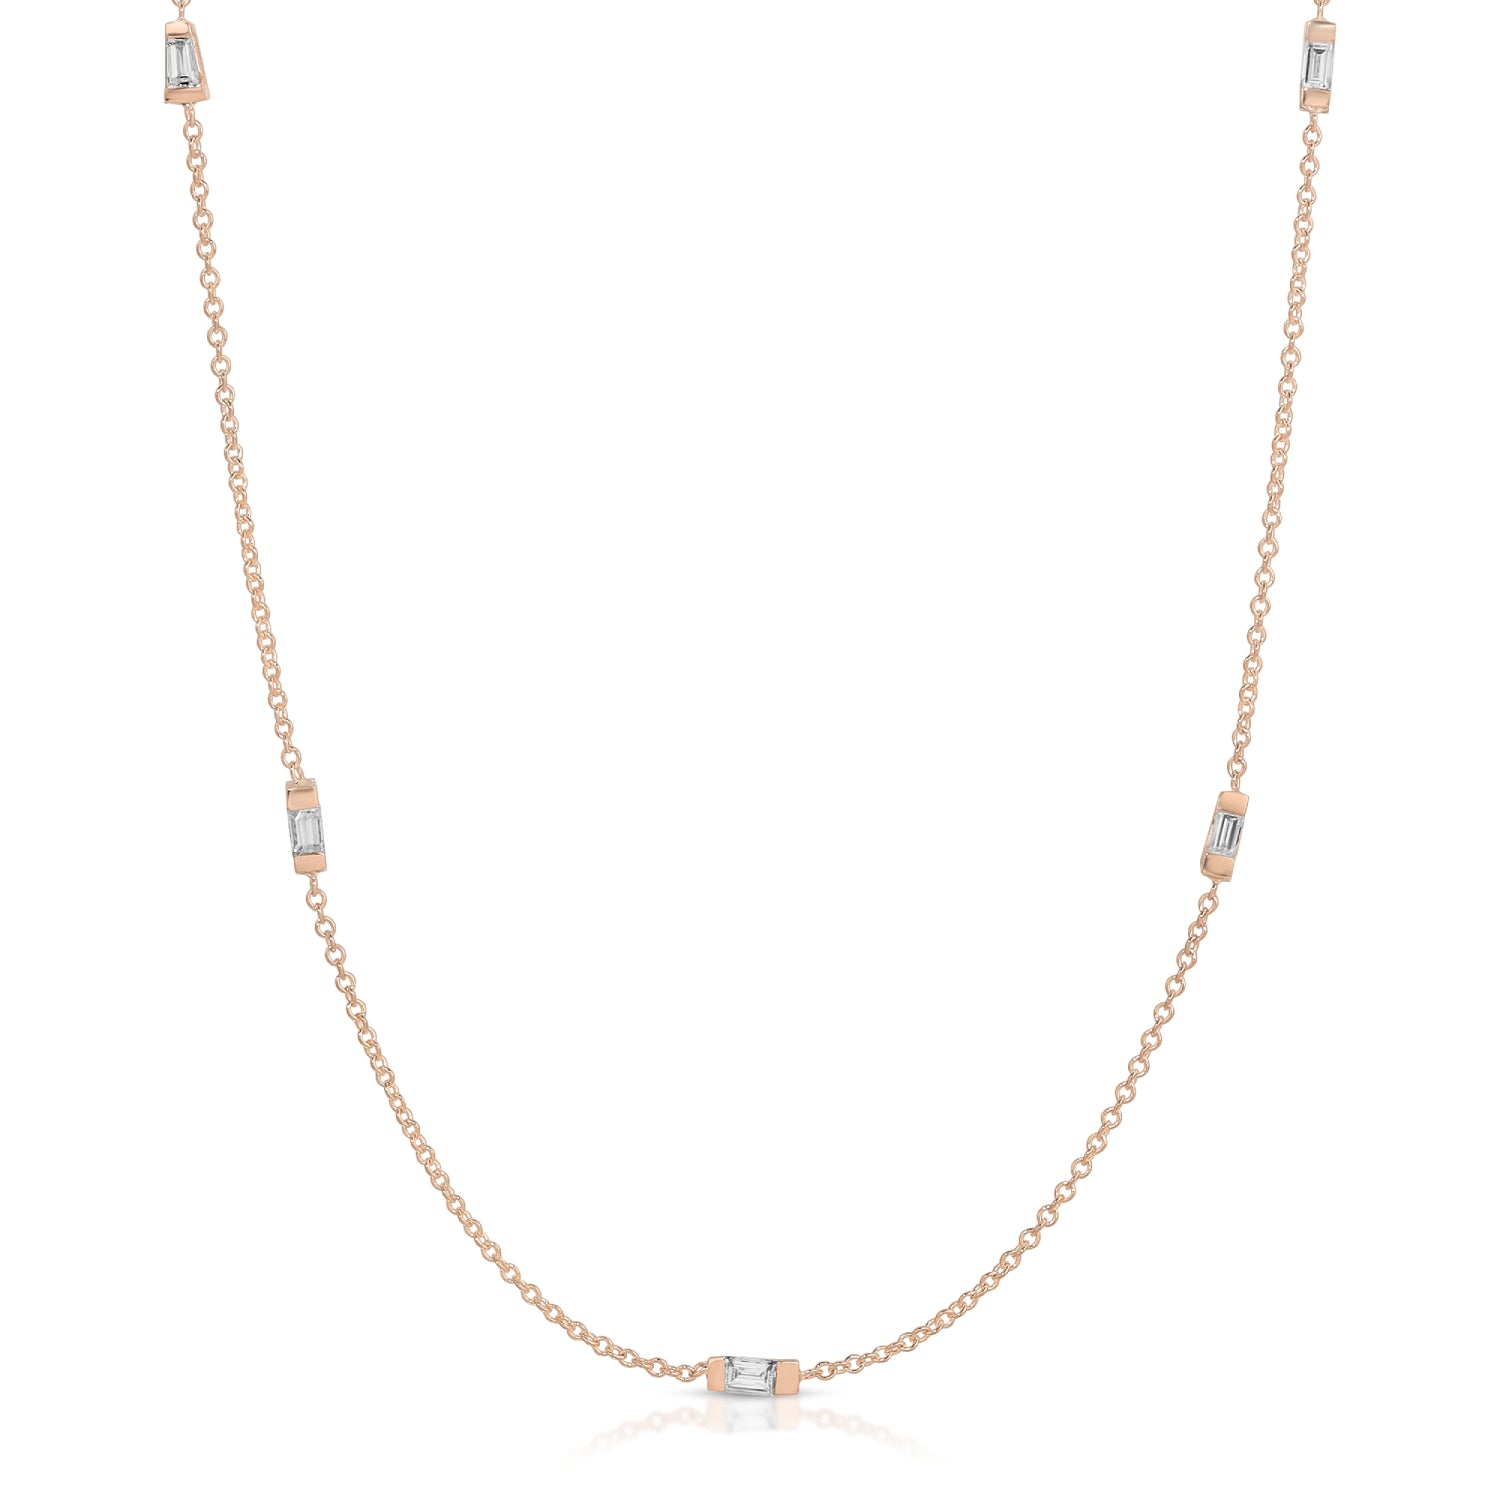 Mixed Baguette Cut Diamond Station Necklace in Rose Gold